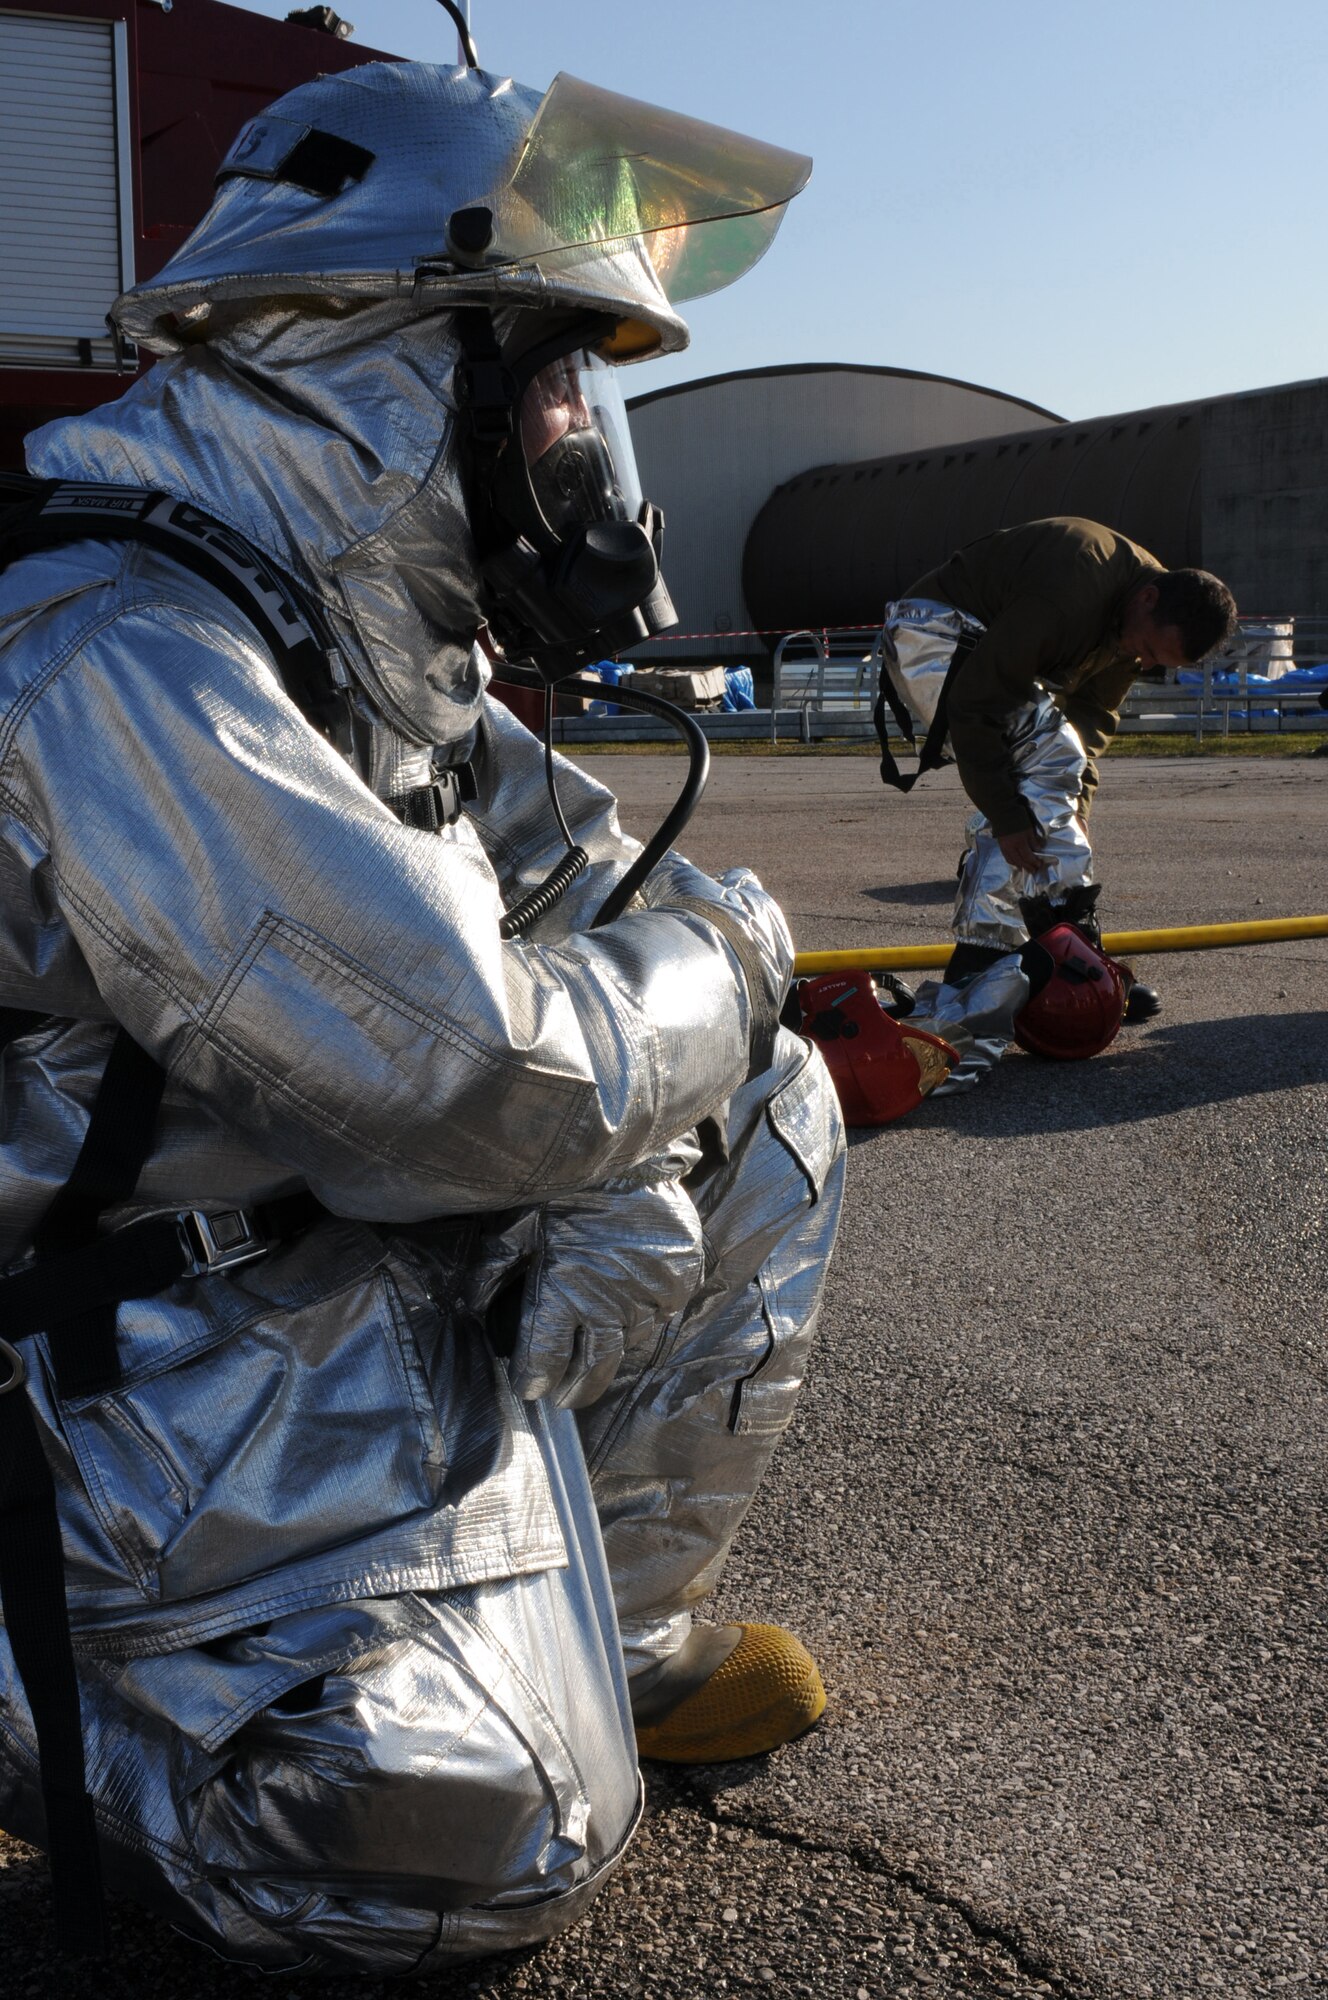 A firefighter assigned to the 31st Civil Engineer Squadron waits for an Italian Air Force firefighter from Decimomannu Air Base, Sardinia, Italy, to suit up during a live fire exercise, Nov. 11, 2009.  Four firefighters from Decimomannu AB took part in the three-day training course at Aviano Air Base, Italy.  The training consisted of hydrazine, F-16 aircraft emergency response procedures and pilot egress, structural fire fighting tactics and strategy.
(U.S. Air Force photo/ Senior Airman Nadine Y. Barclay)